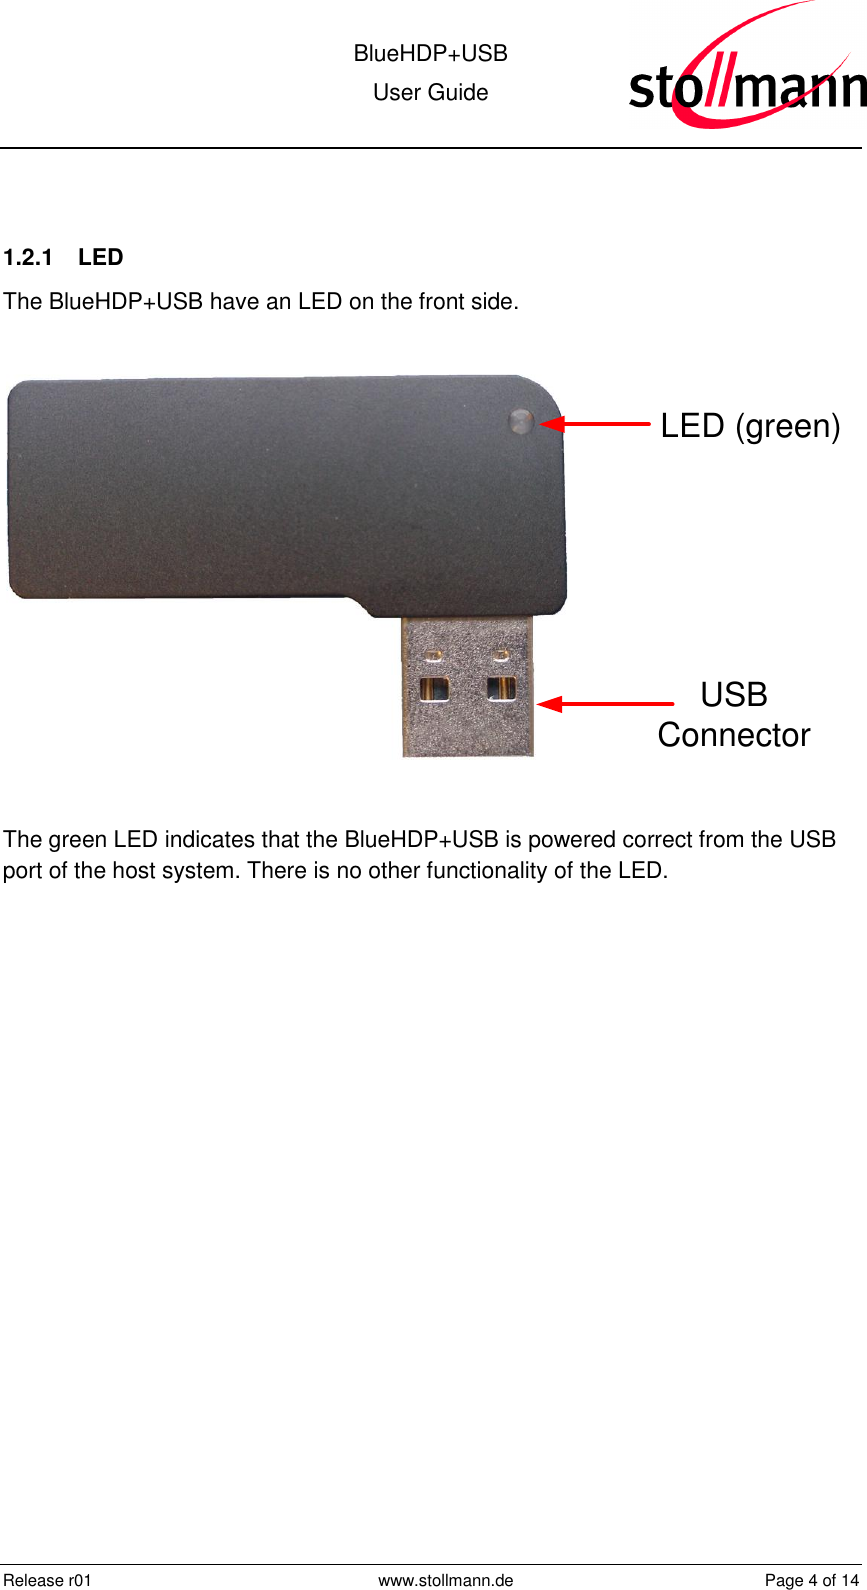  BlueHDP+USB User Guide  Release r01  www.stollmann.de  Page 4 of 14   1.2.1  LED The BlueHDP+USB have an LED on the front side.  LED (green)USB Connector  The green LED indicates that the BlueHDP+USB is powered correct from the USB port of the host system. There is no other functionality of the LED.  